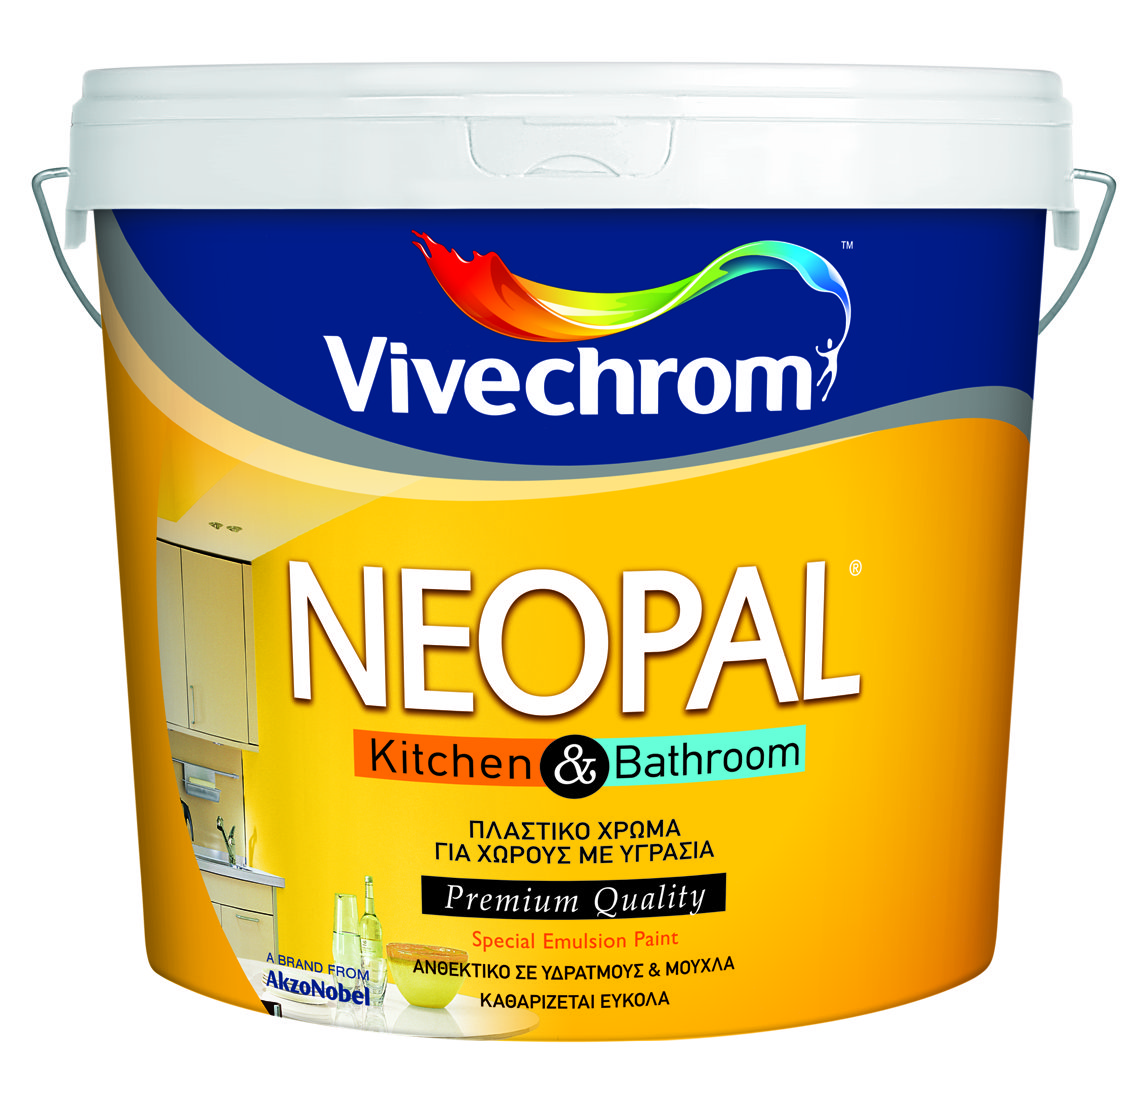 Vivechrom Neopal Kitchen & Bathroom Mixing Base P 3L